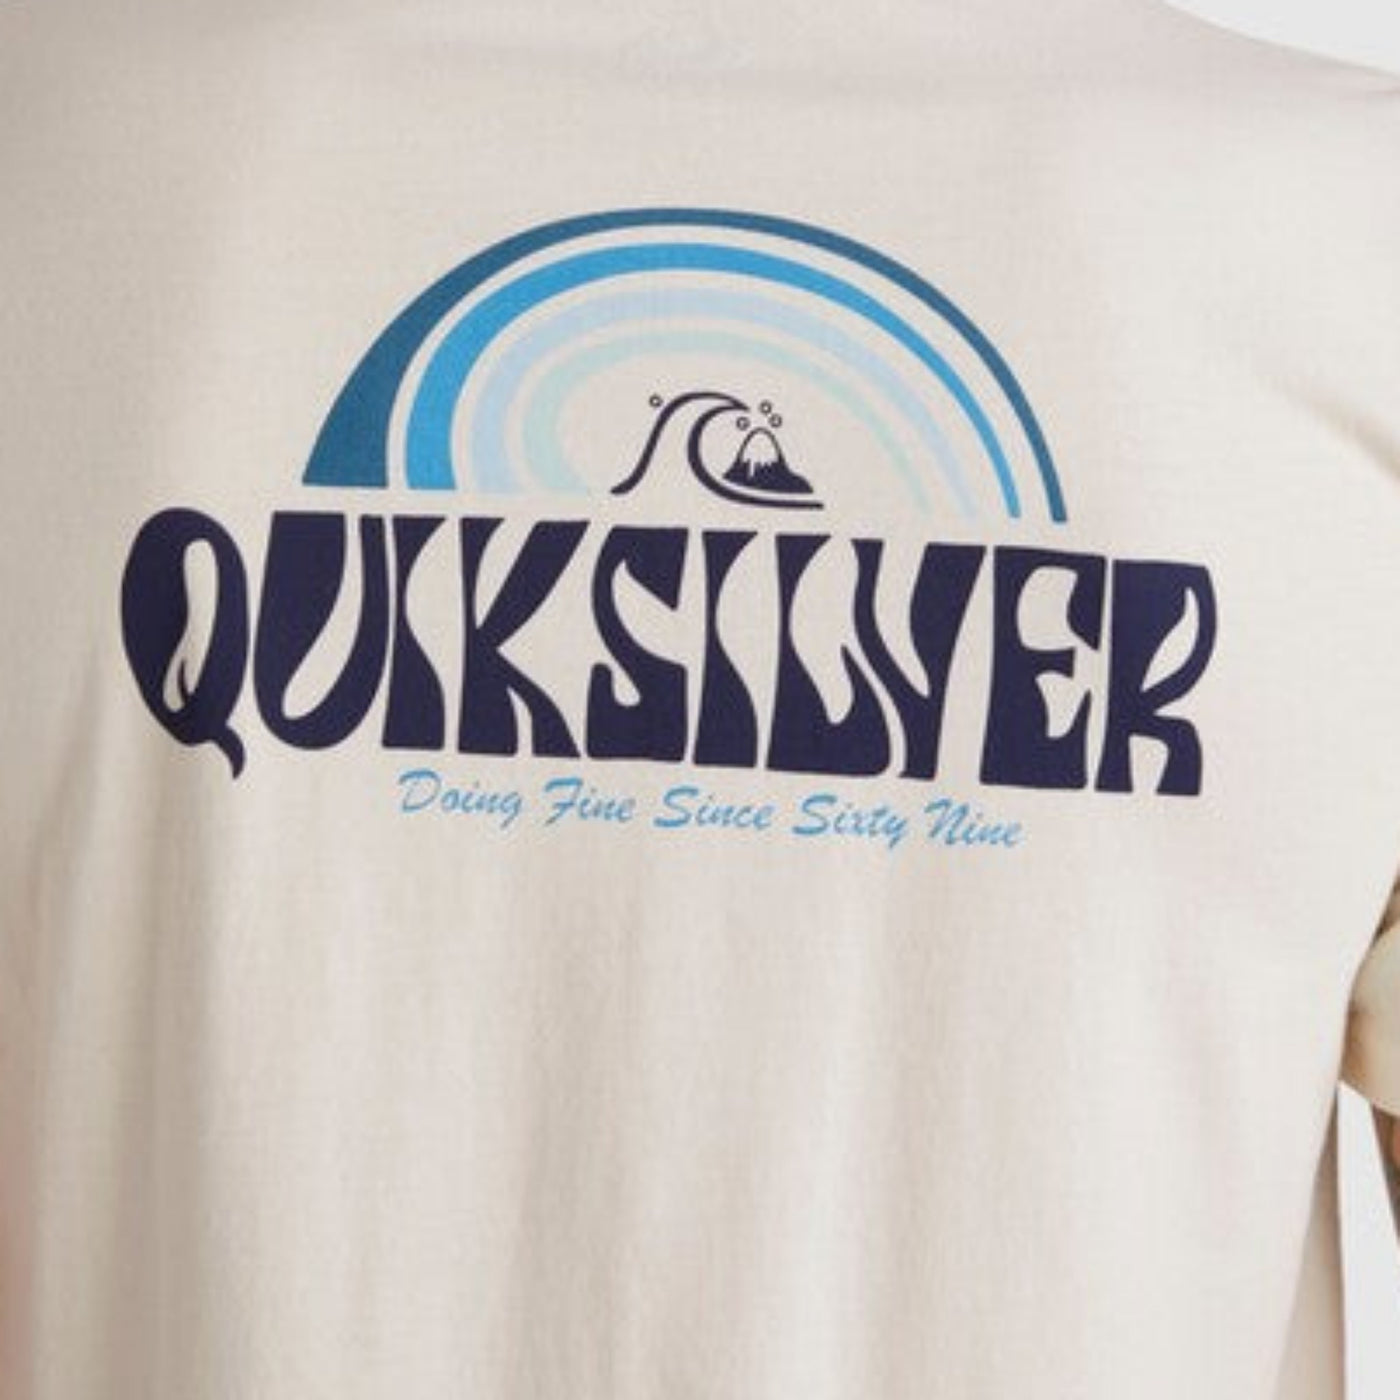 Quiksilver Above The Clouds Tee - Birch